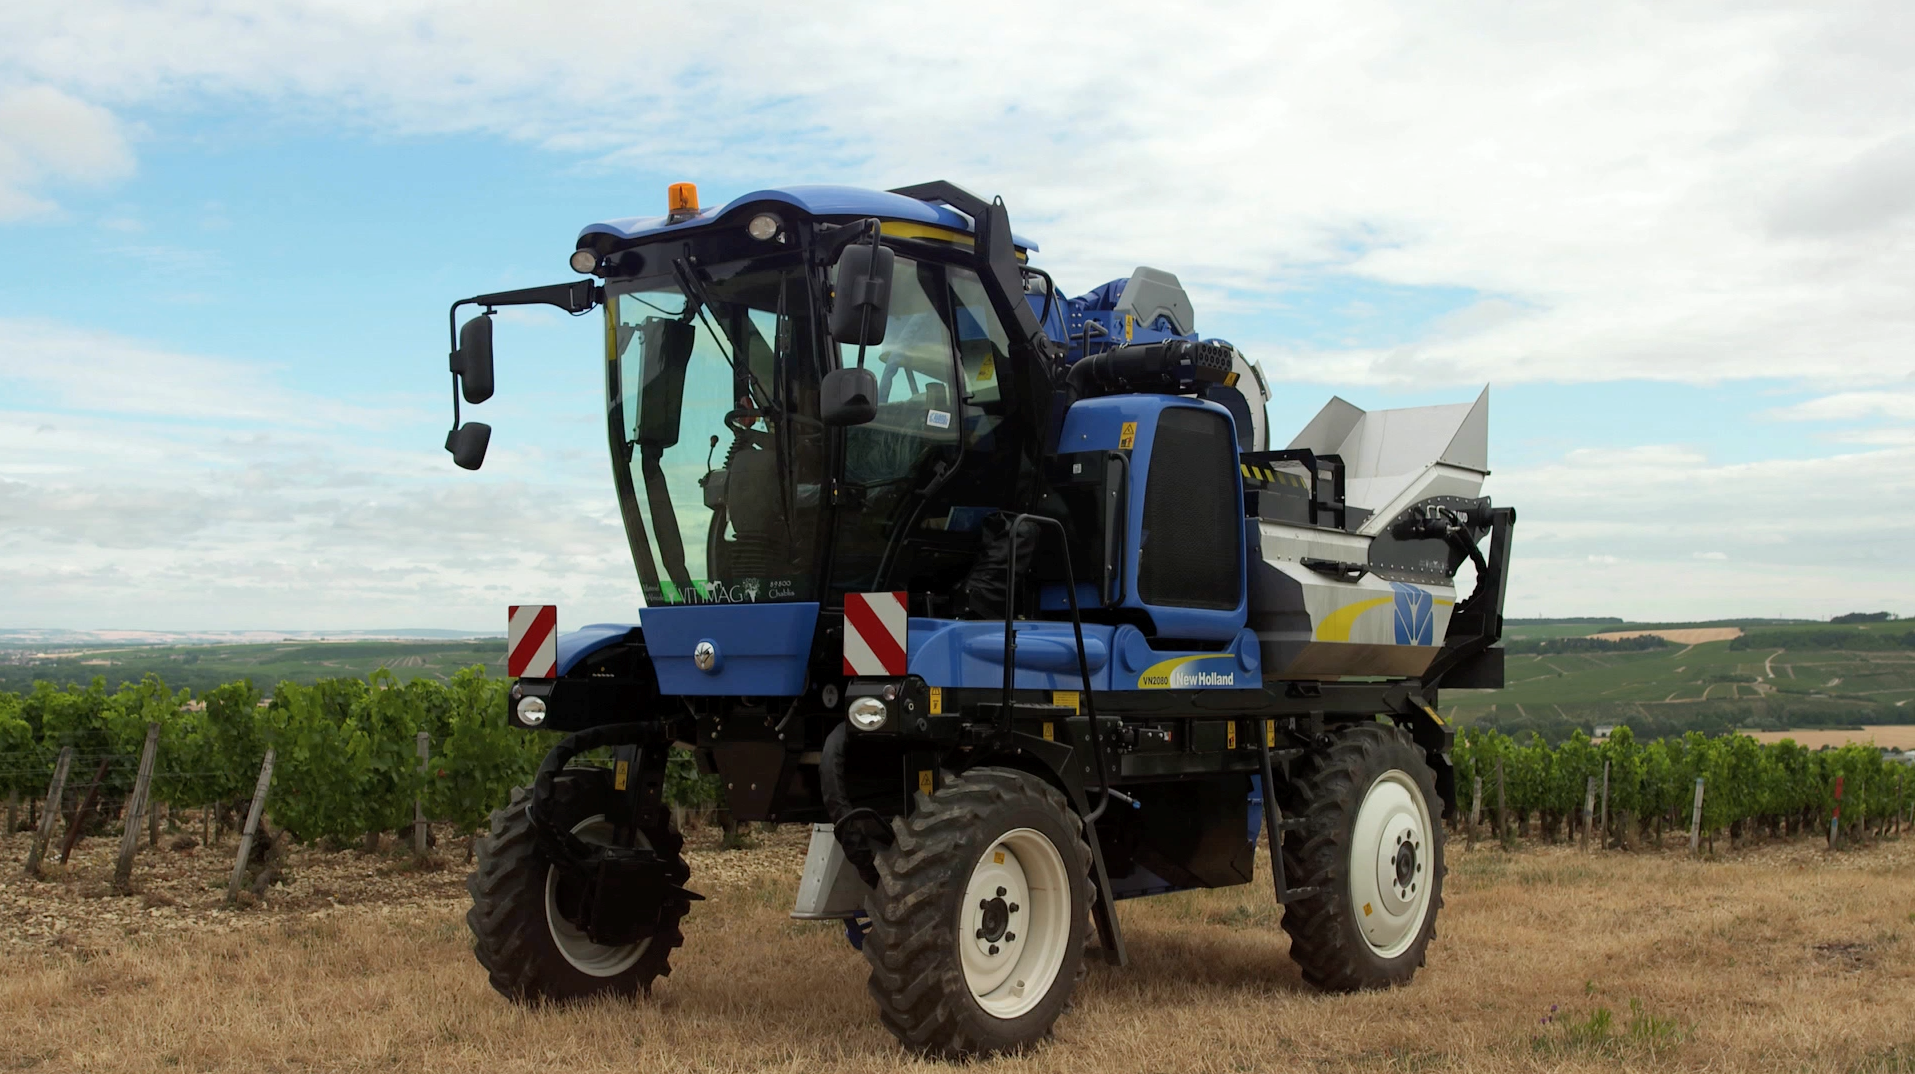 The VN2080 Grape Harvester from New Holland Agriculture